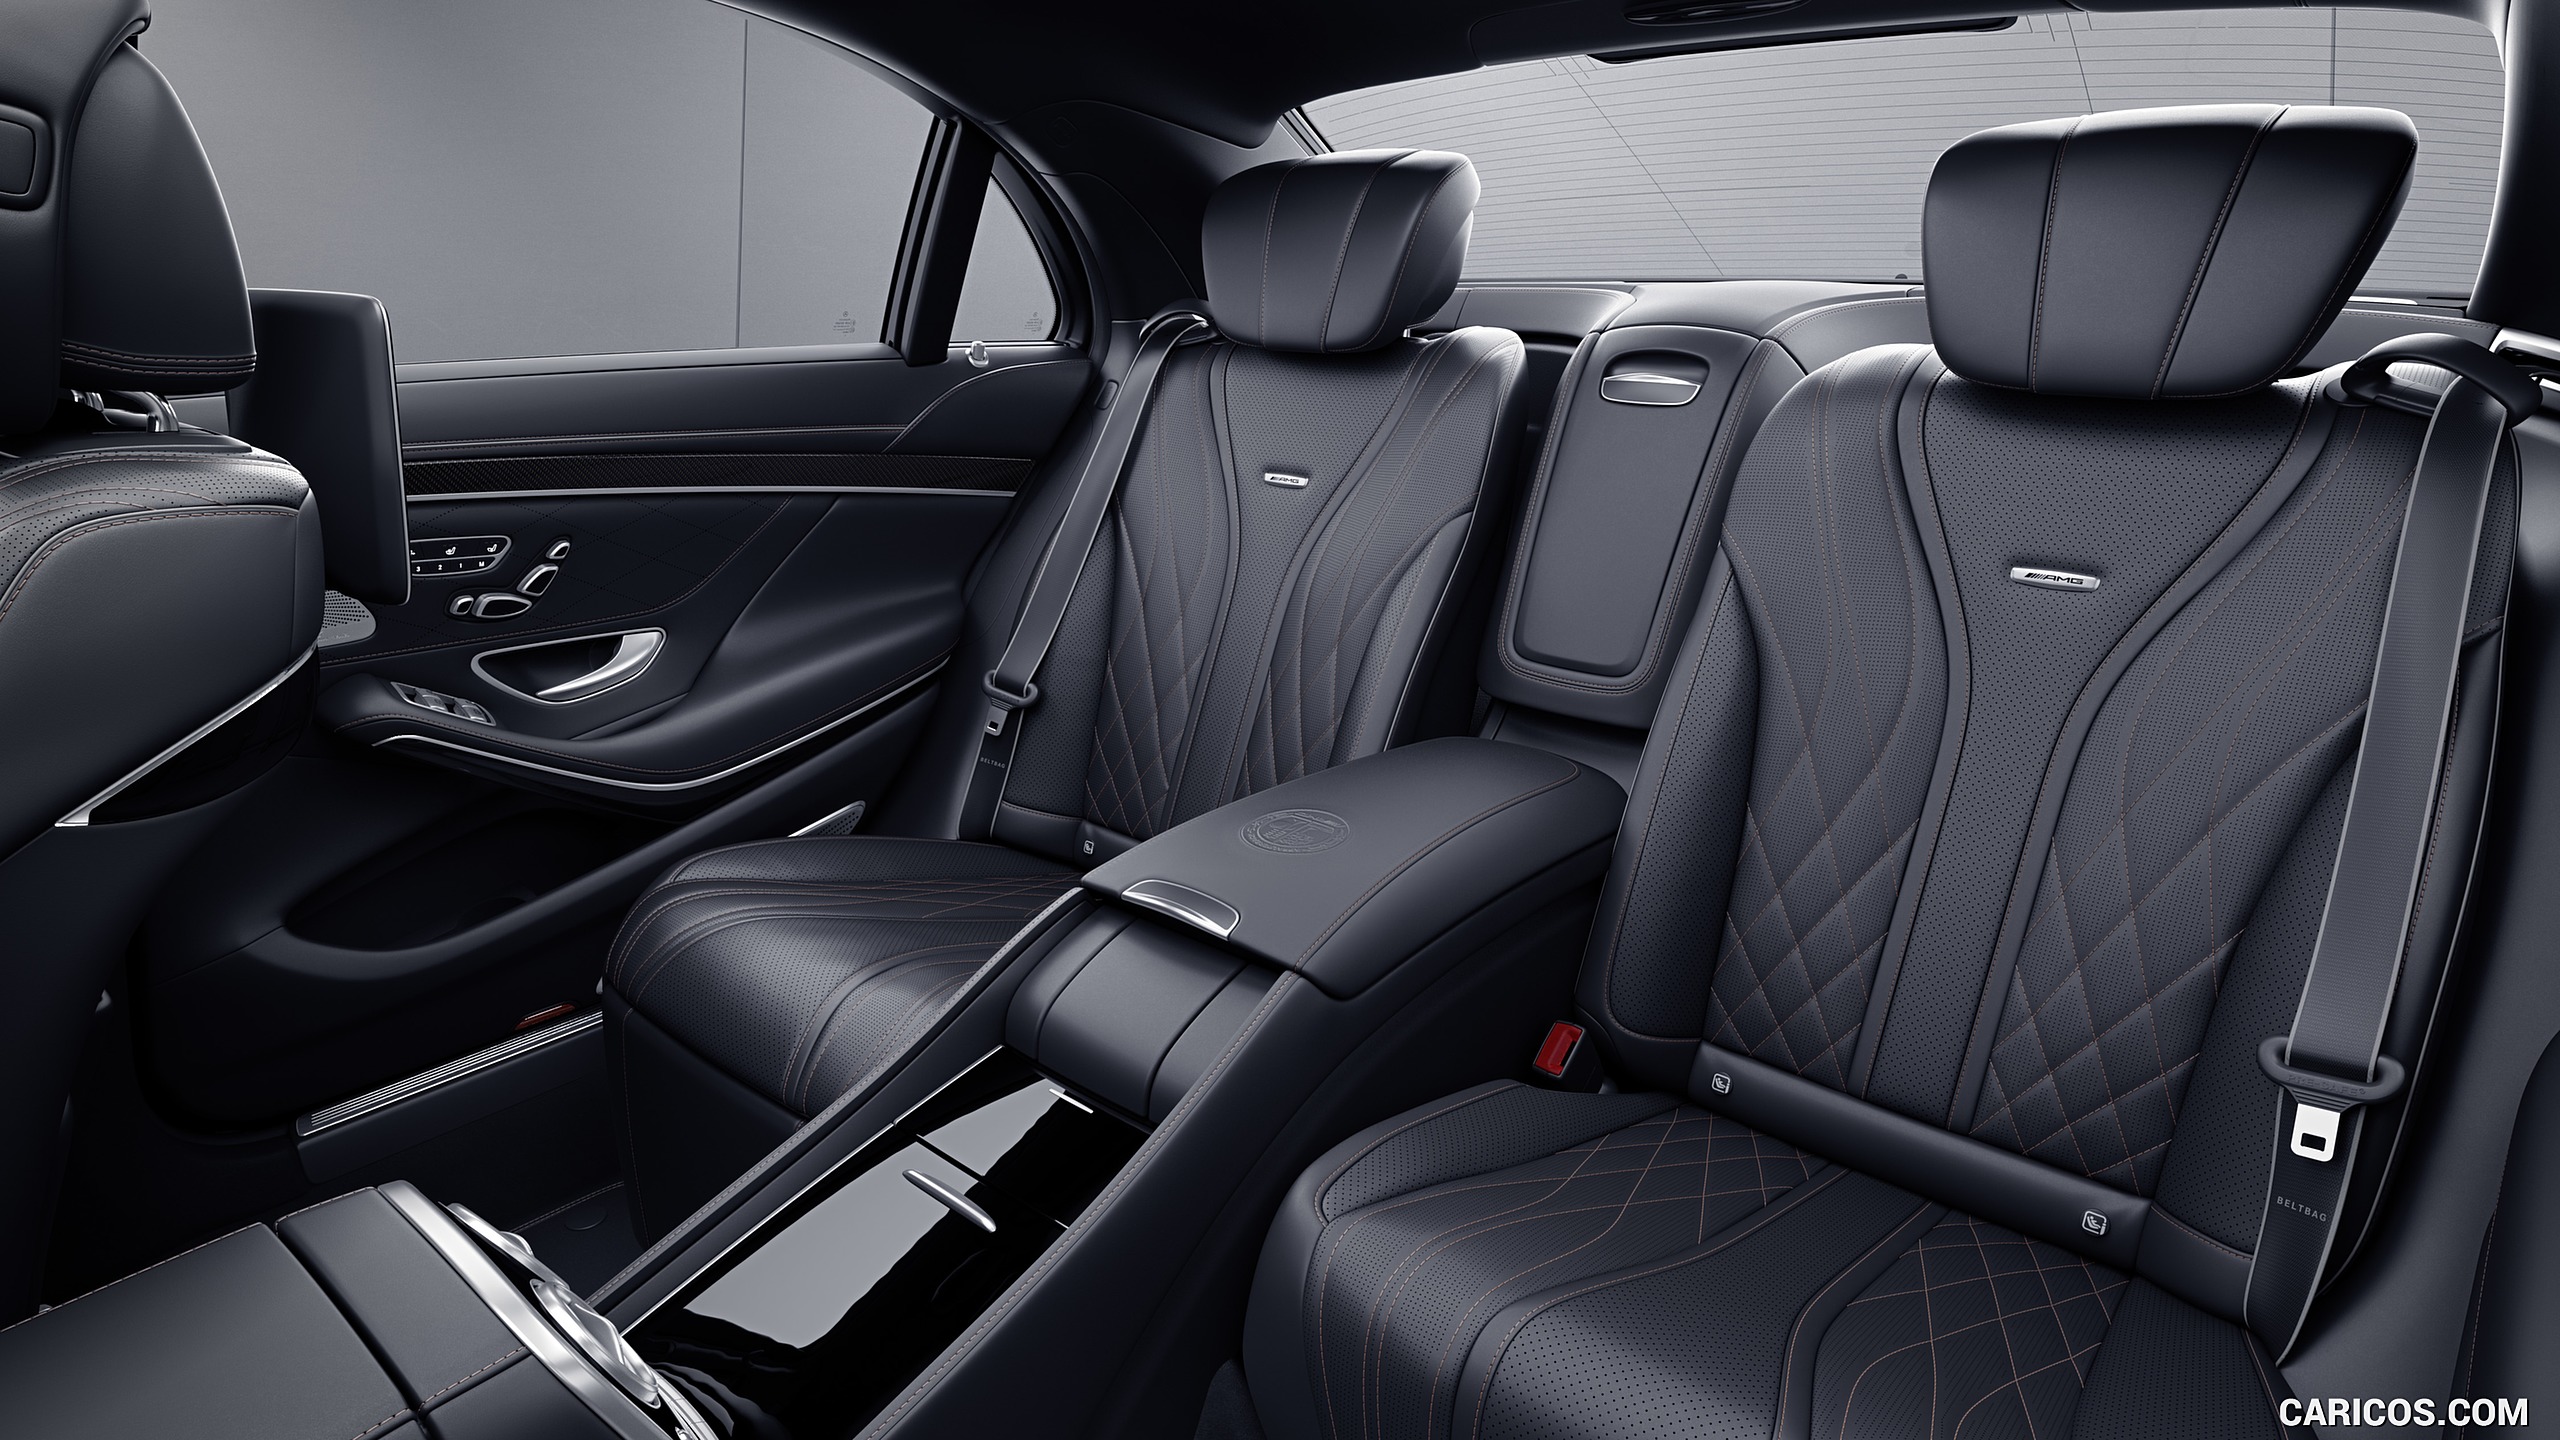 2019 Mercedes-AMG S 65 Final Edition - Interior, Rear Seats, #9 of 10